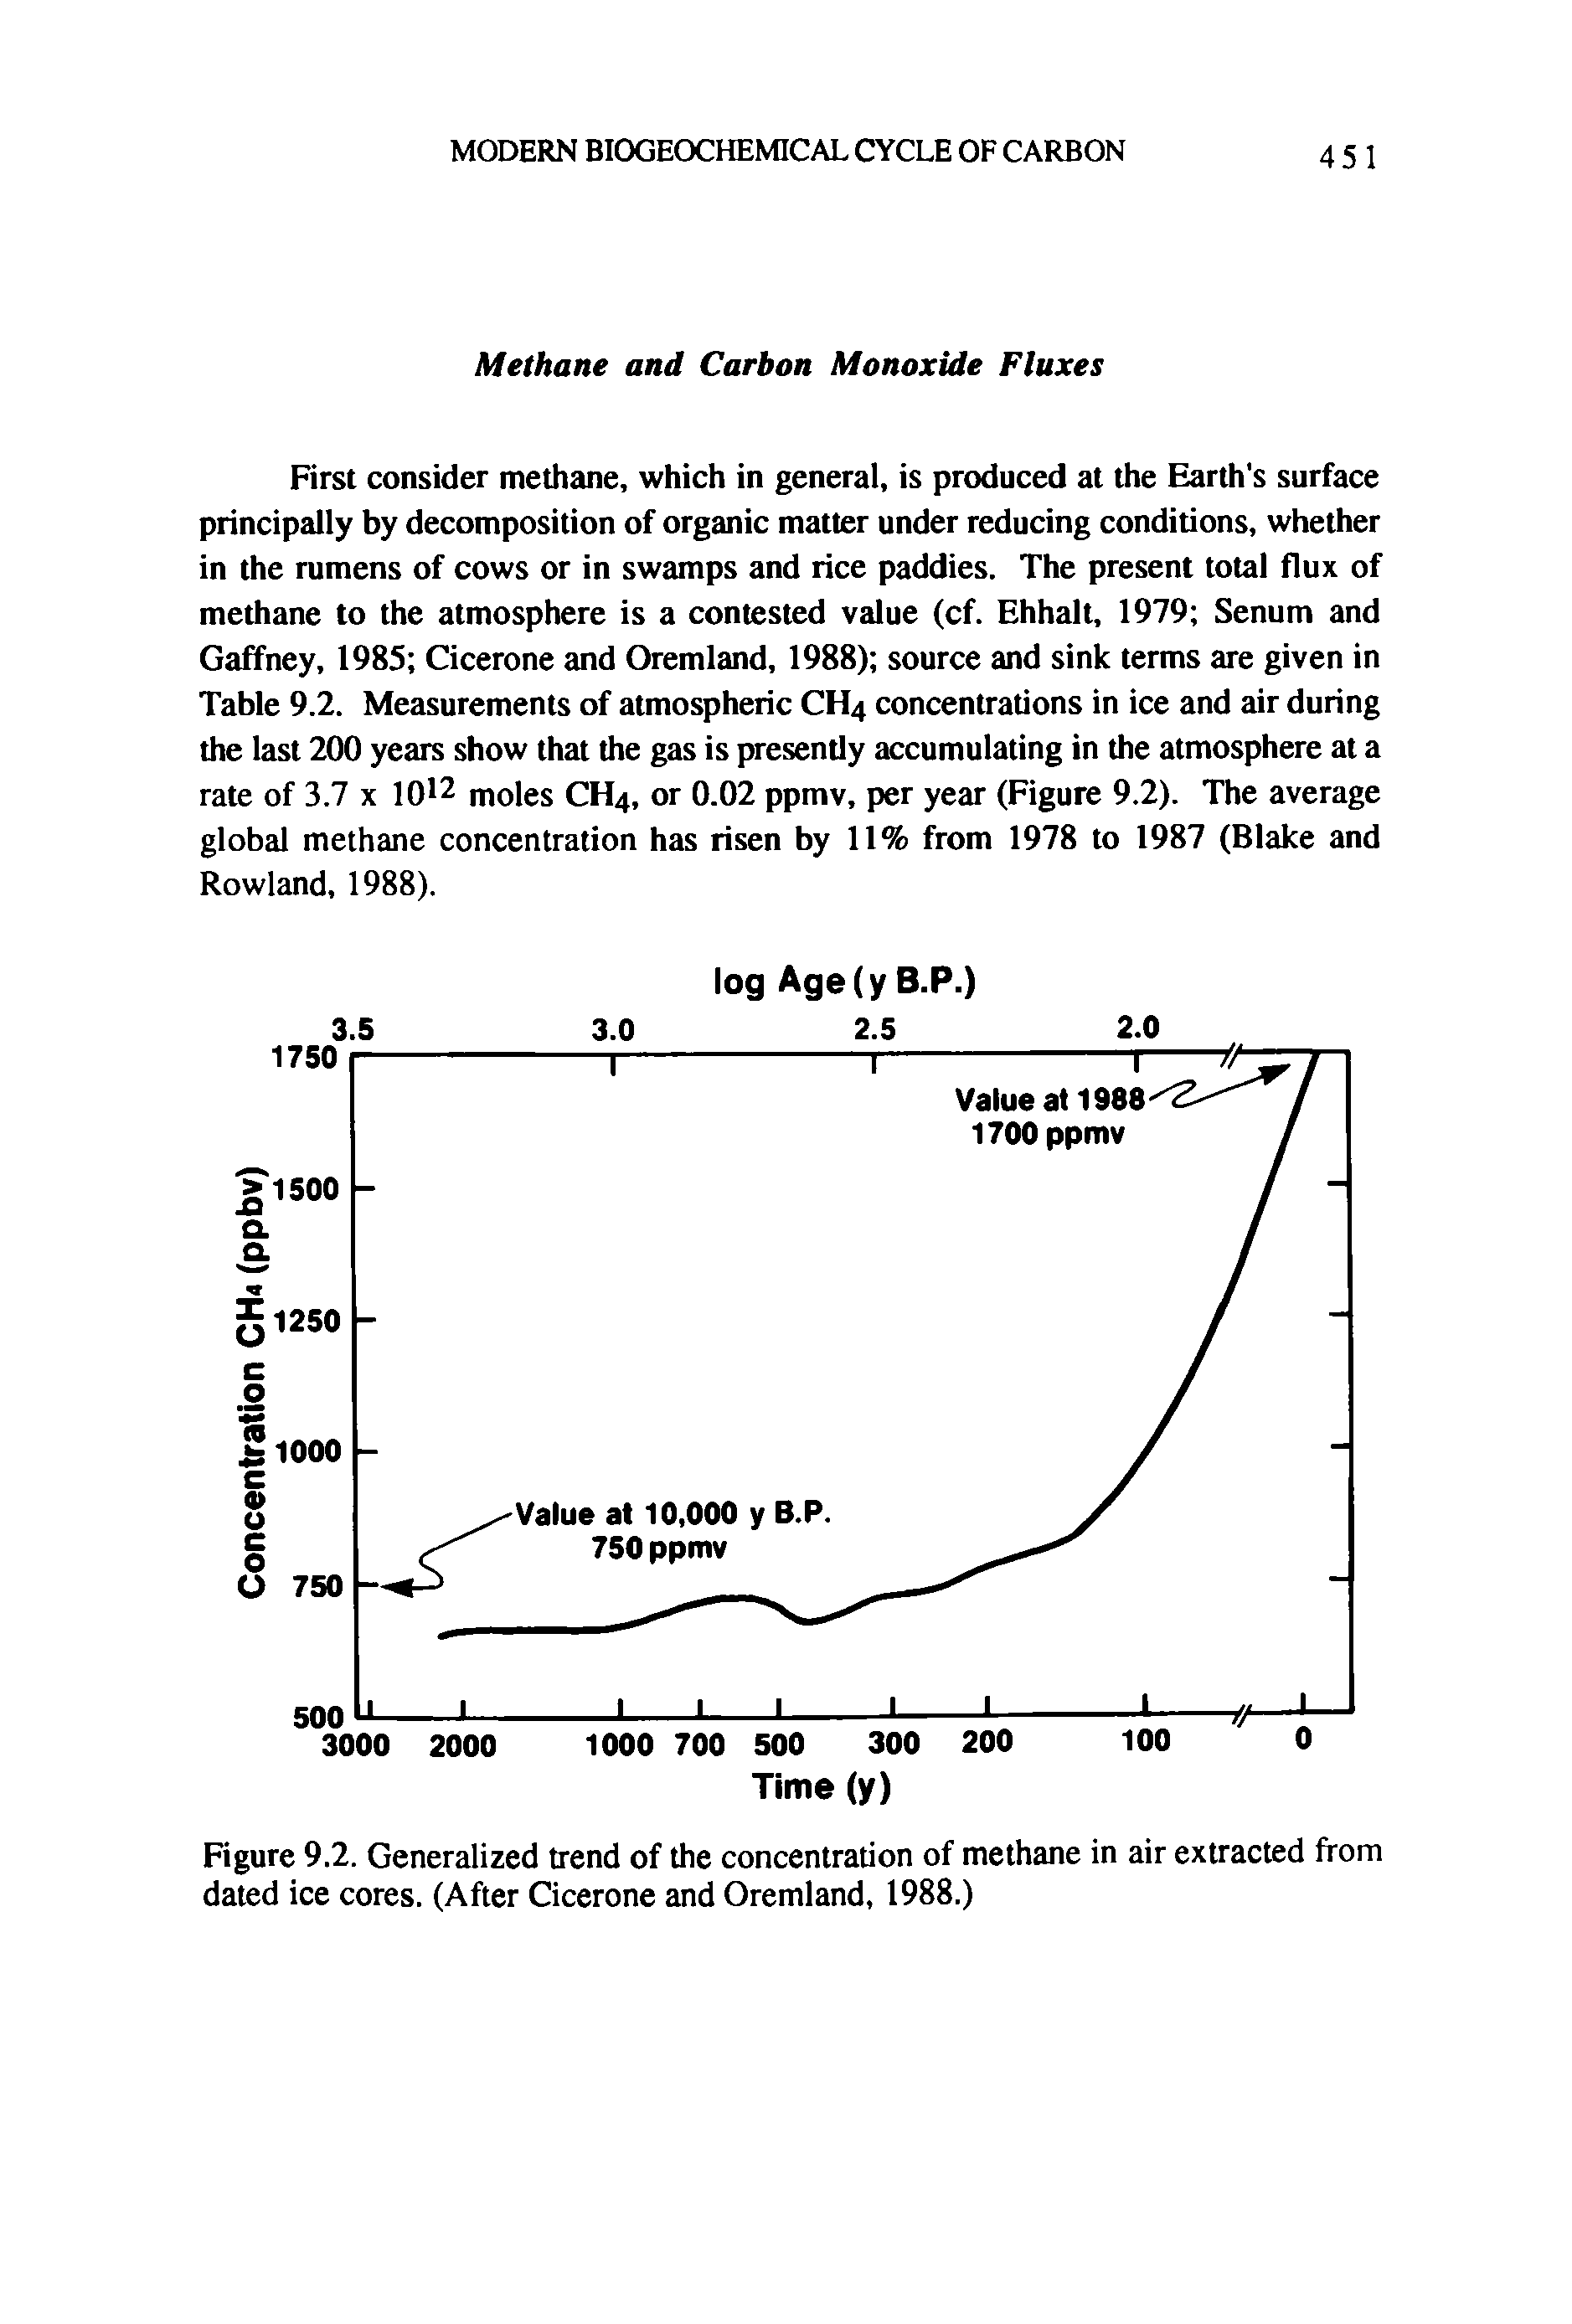 Figure 9.2. Generalized trend of the concentration of methane in air extracted from dated ice cores. (After Cicerone and Oremland, 1988.)...